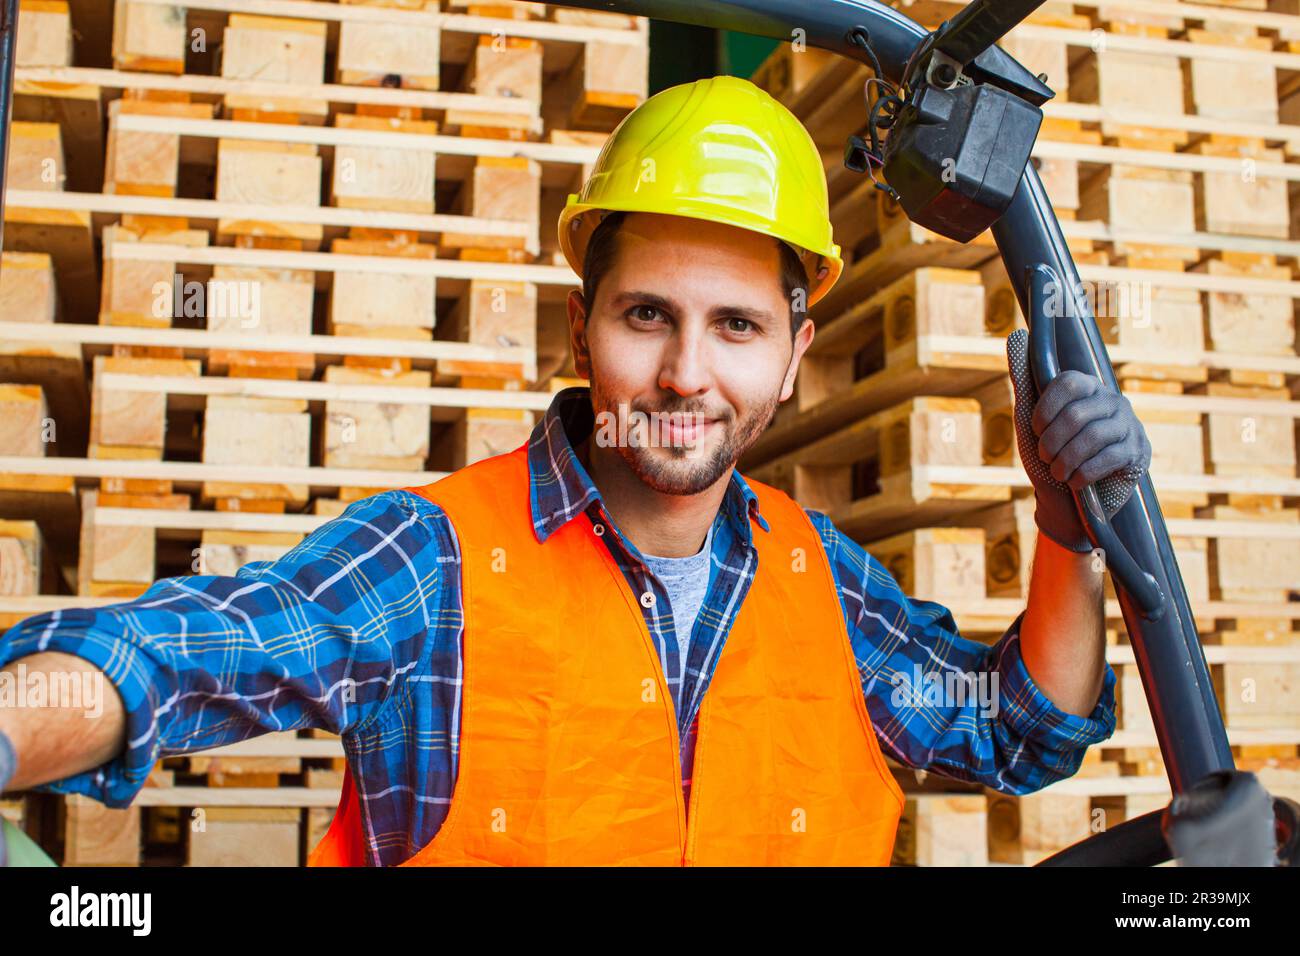 Workman wears protective helmet, vest and gloves. Worker standing near forklift in warehouse. Stock Photo